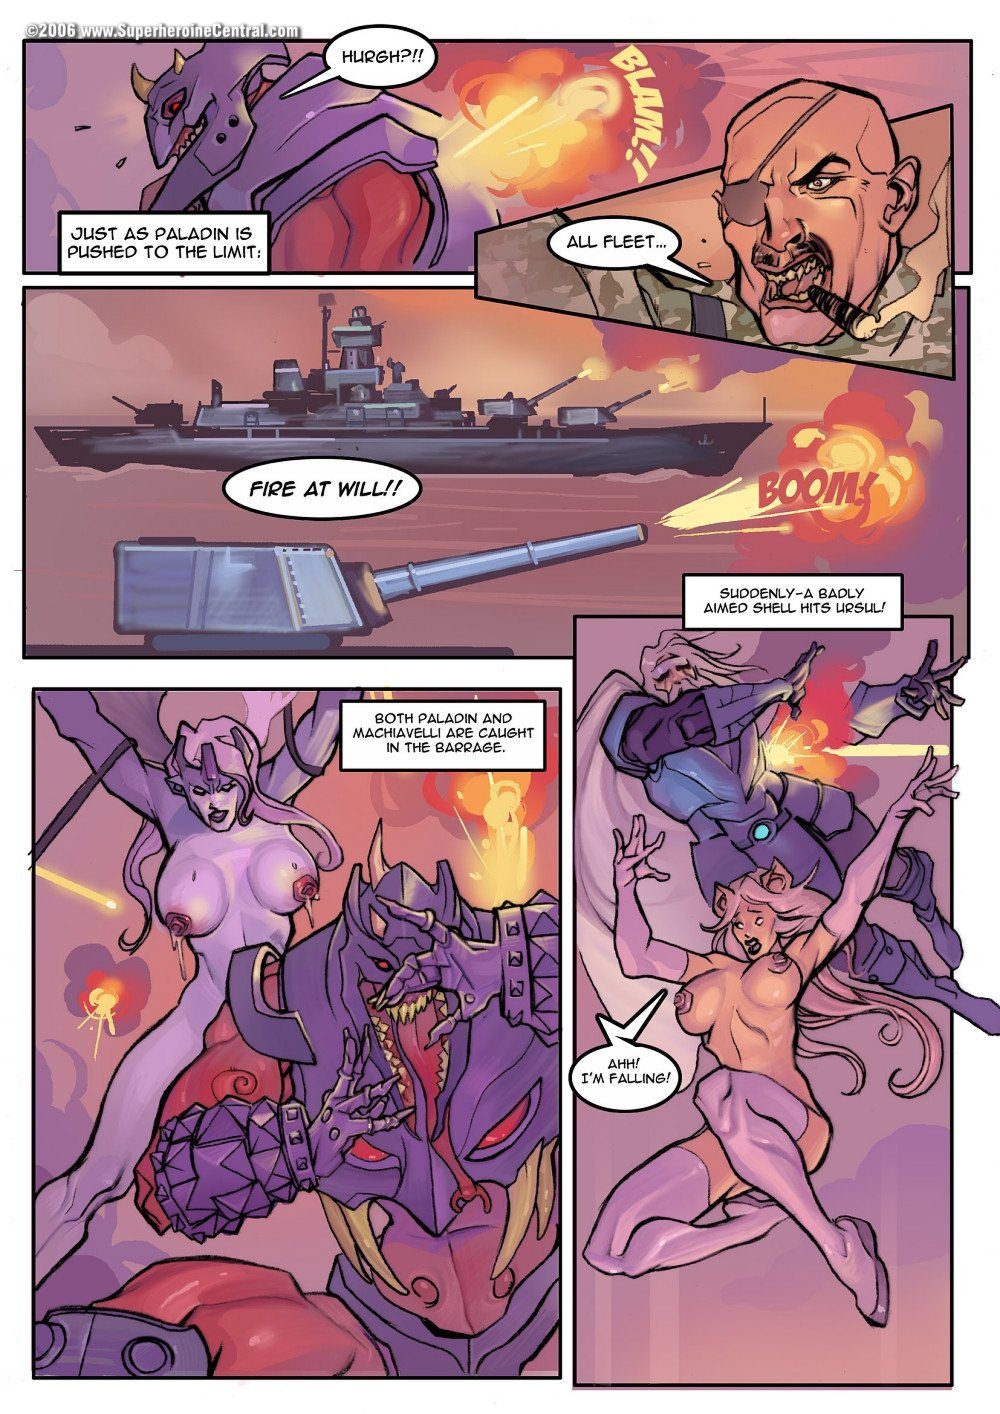 Paladin in short Circuit 2 page 22